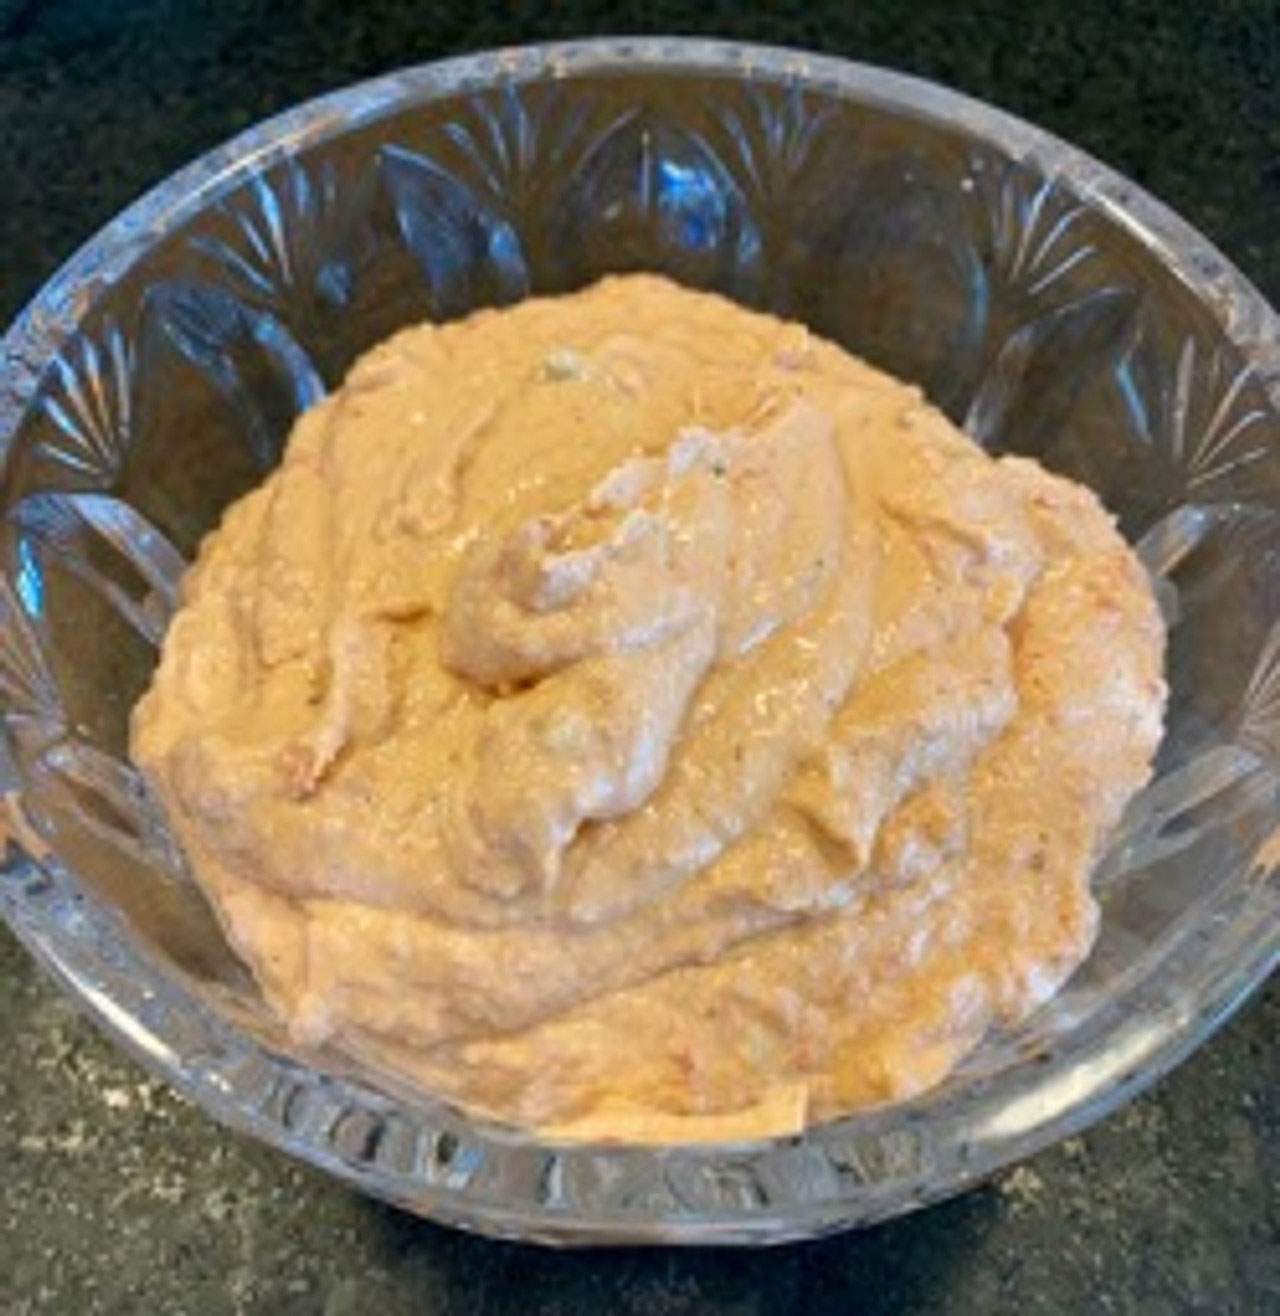 A bowl filled with soybean hummus.